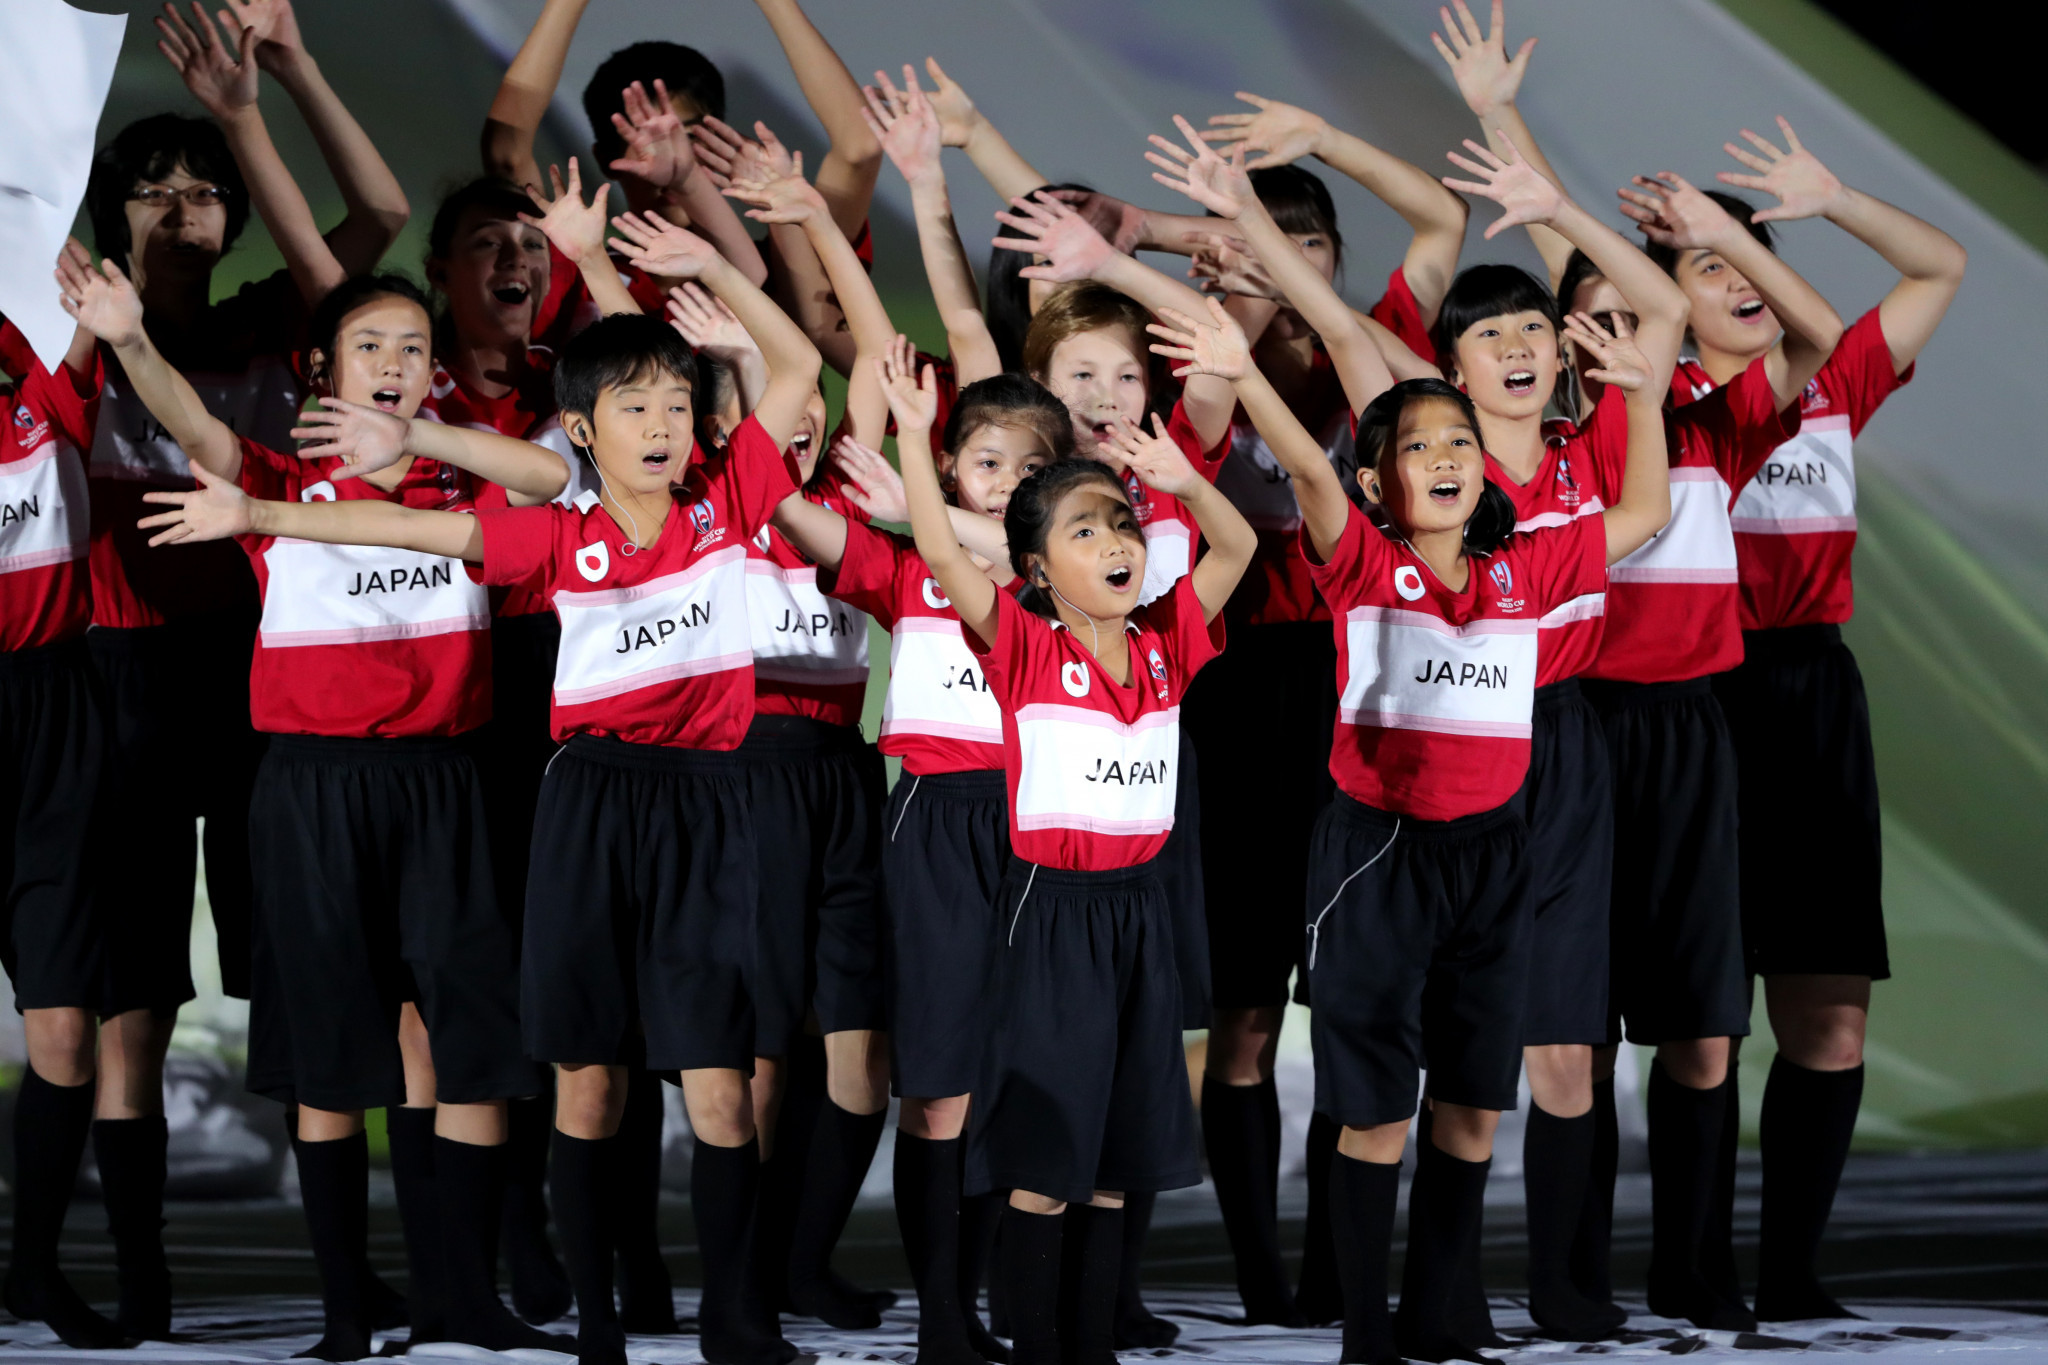 Children sang the World in Union theme ©Getty Images